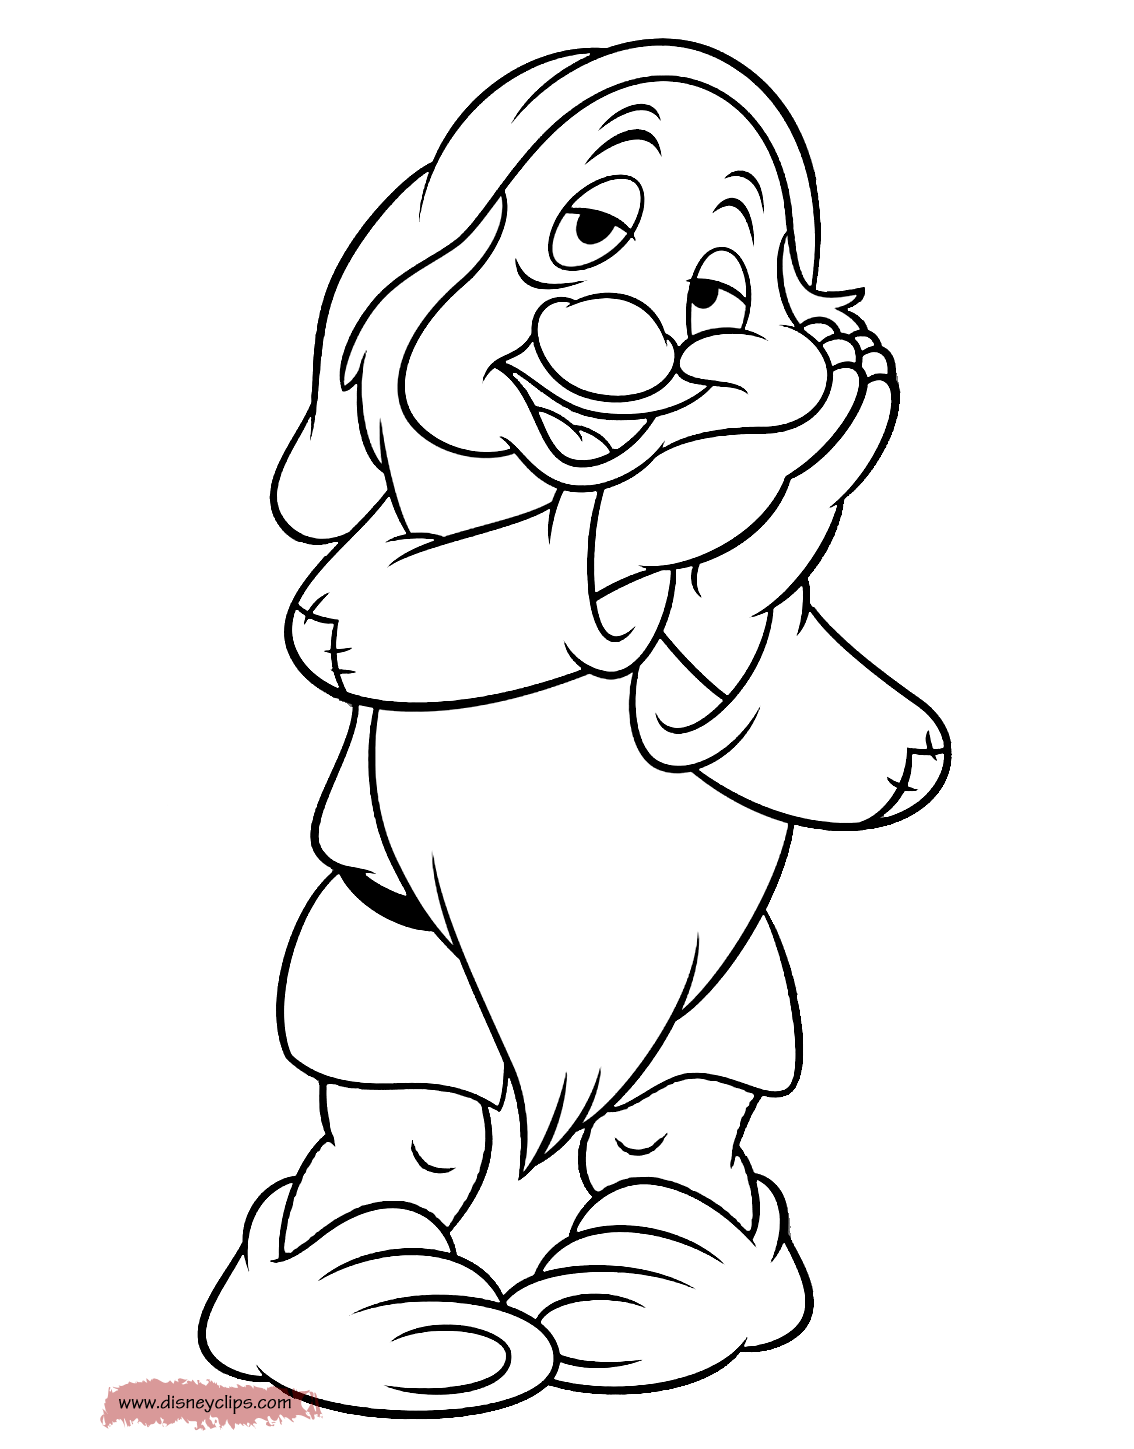 Snow White and the Seven Dwarfs Coloring Pages 3 Disney